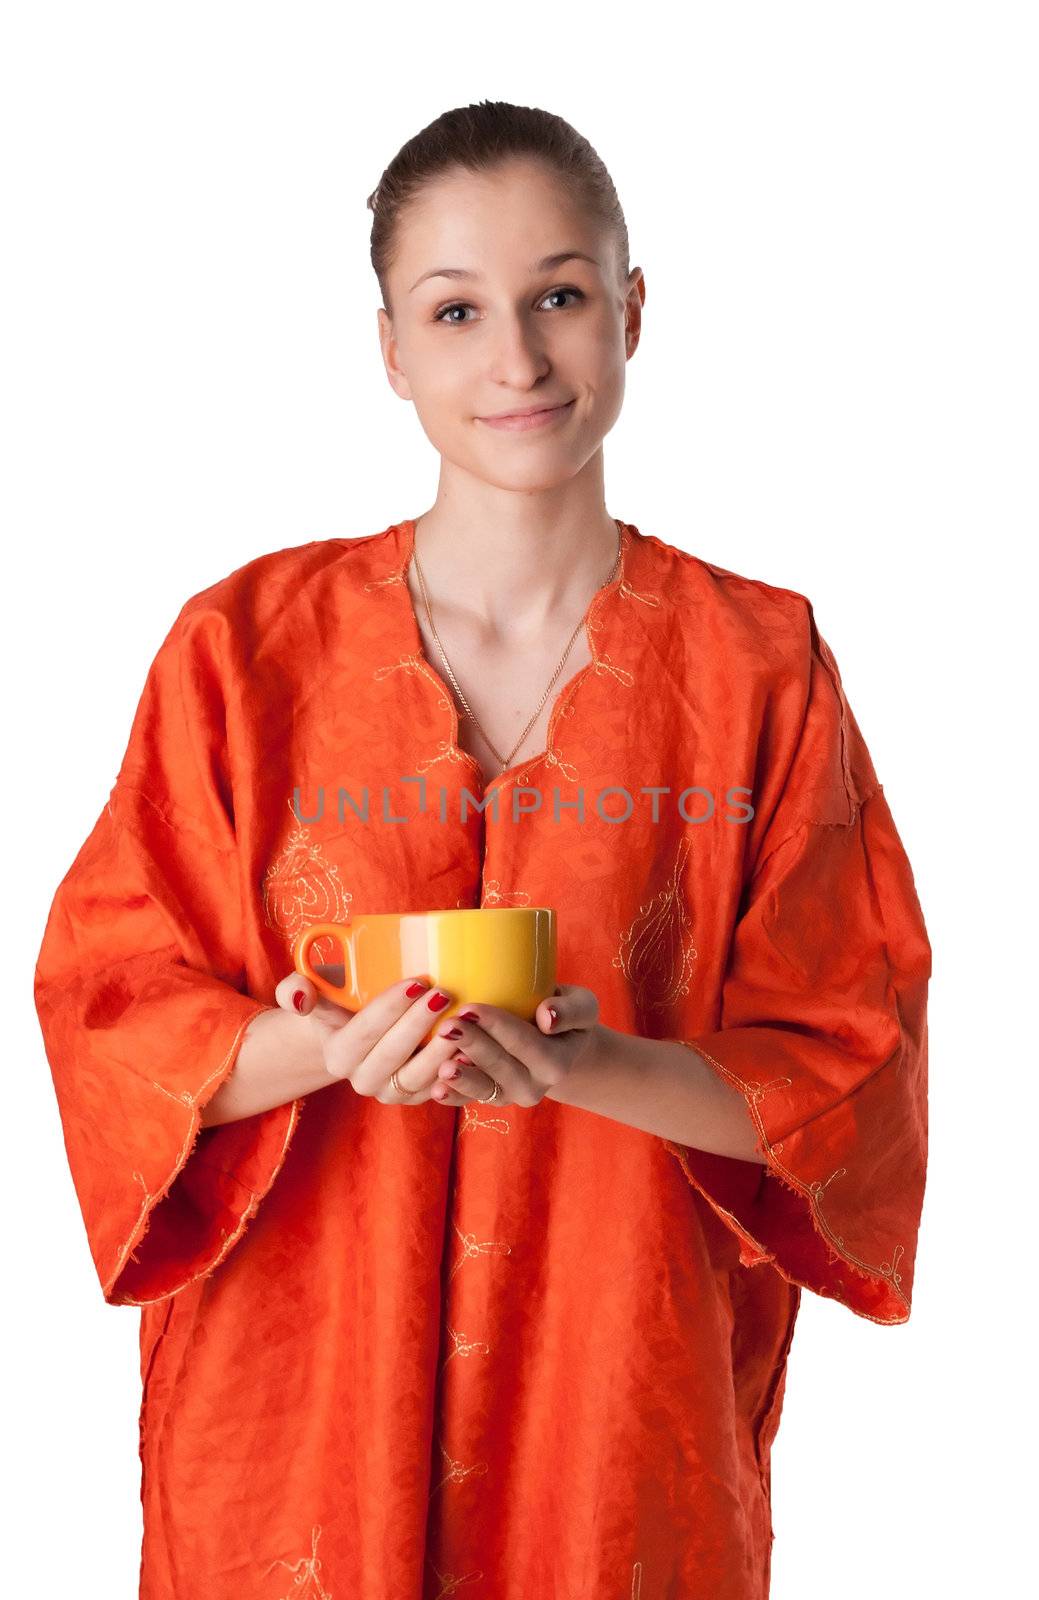 The girl in the orange robe offers tea by victosha